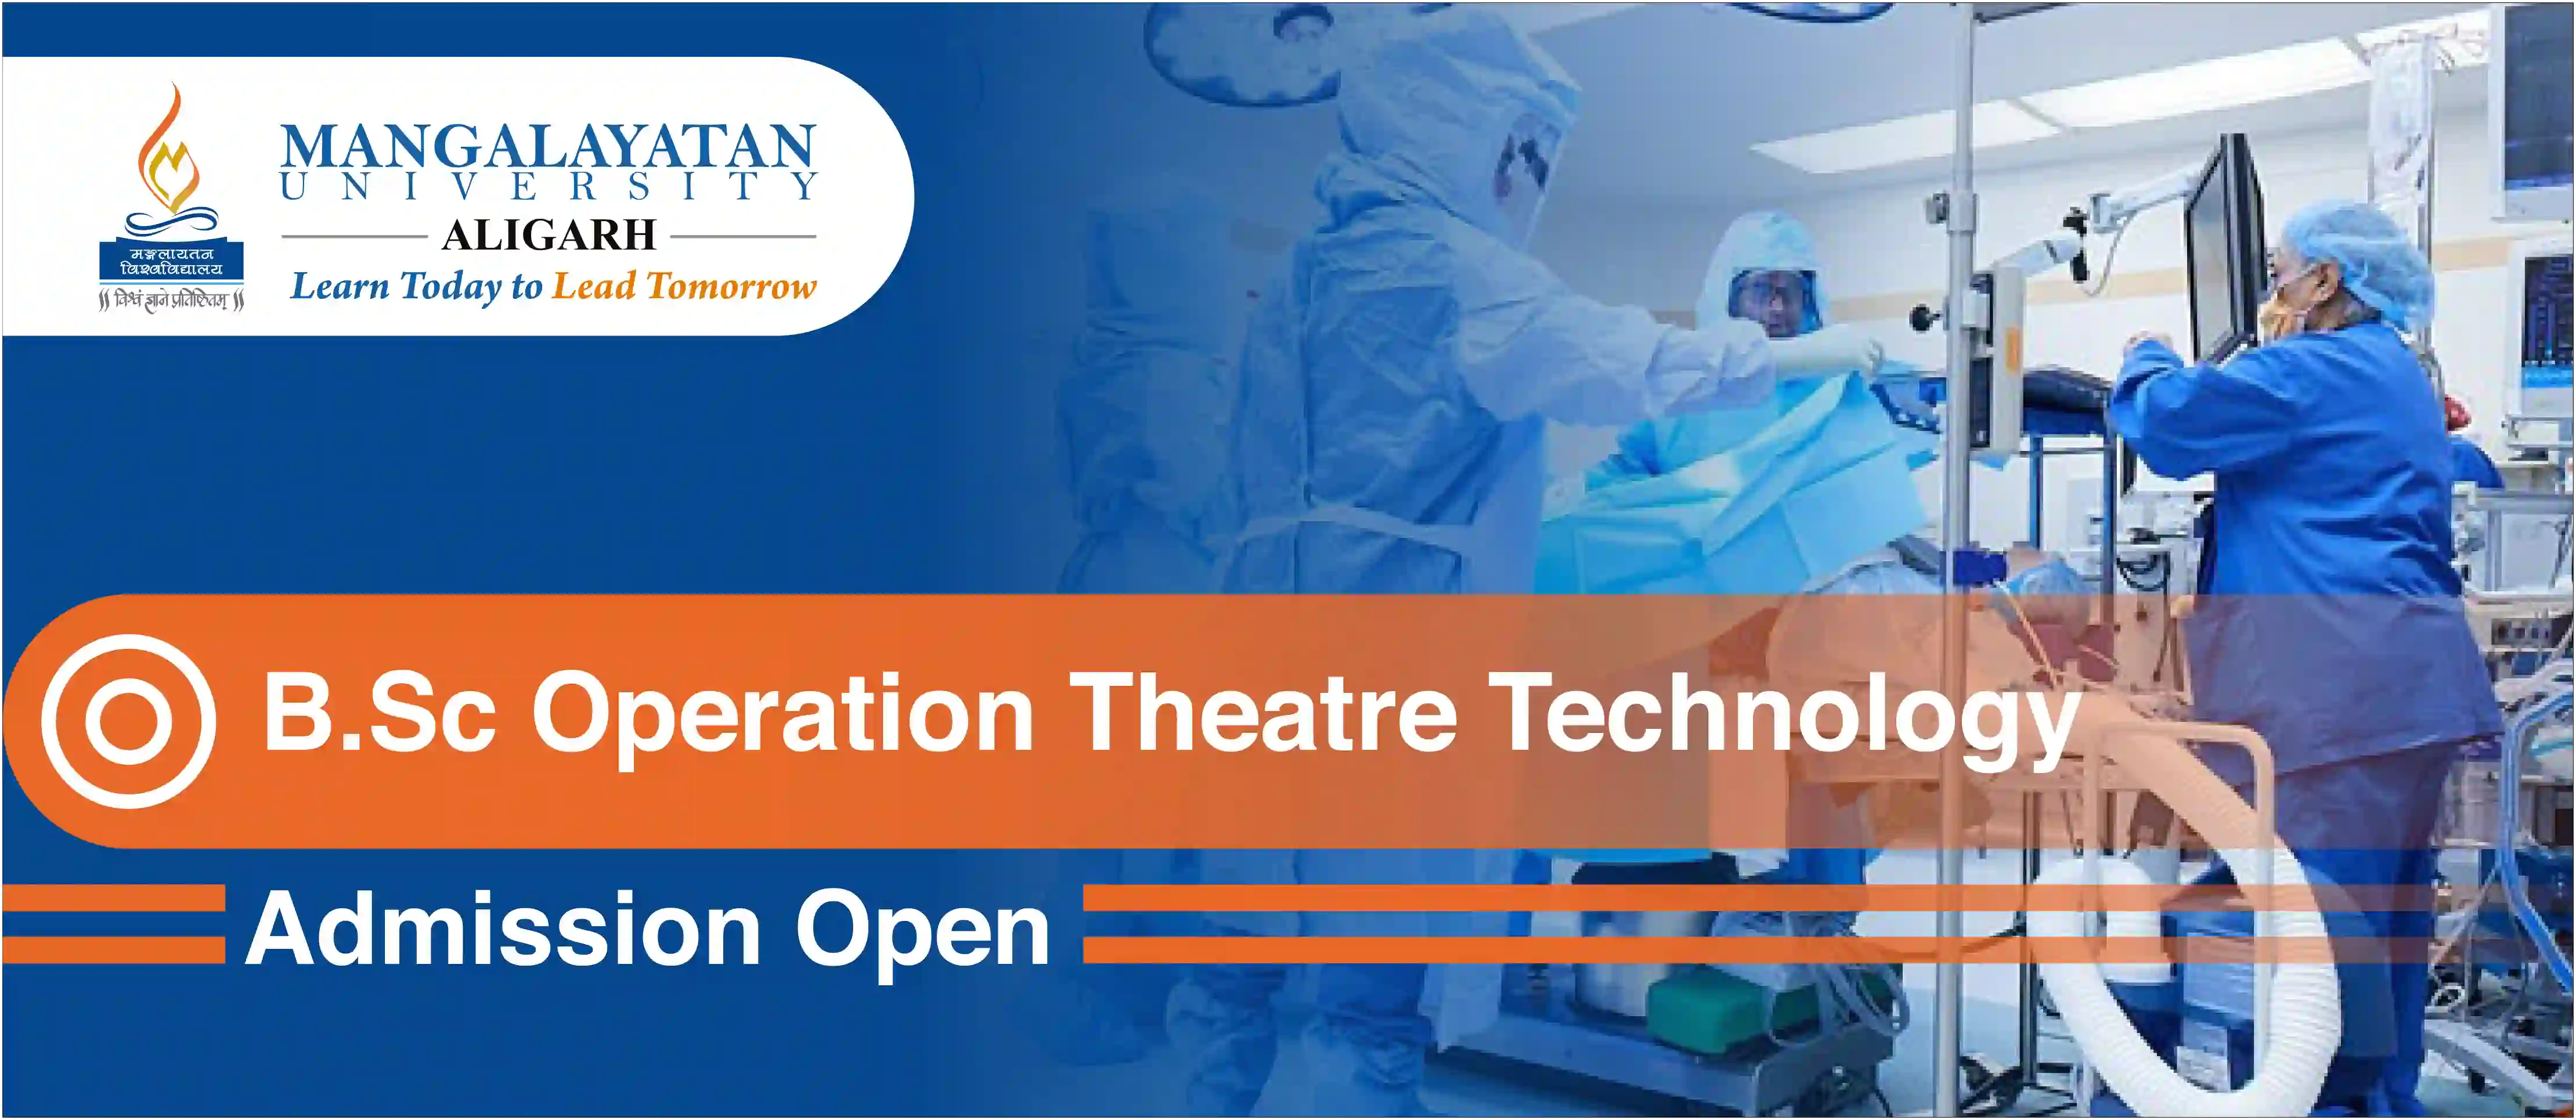 B.Sc. Operation Theatre Technology Course Admission